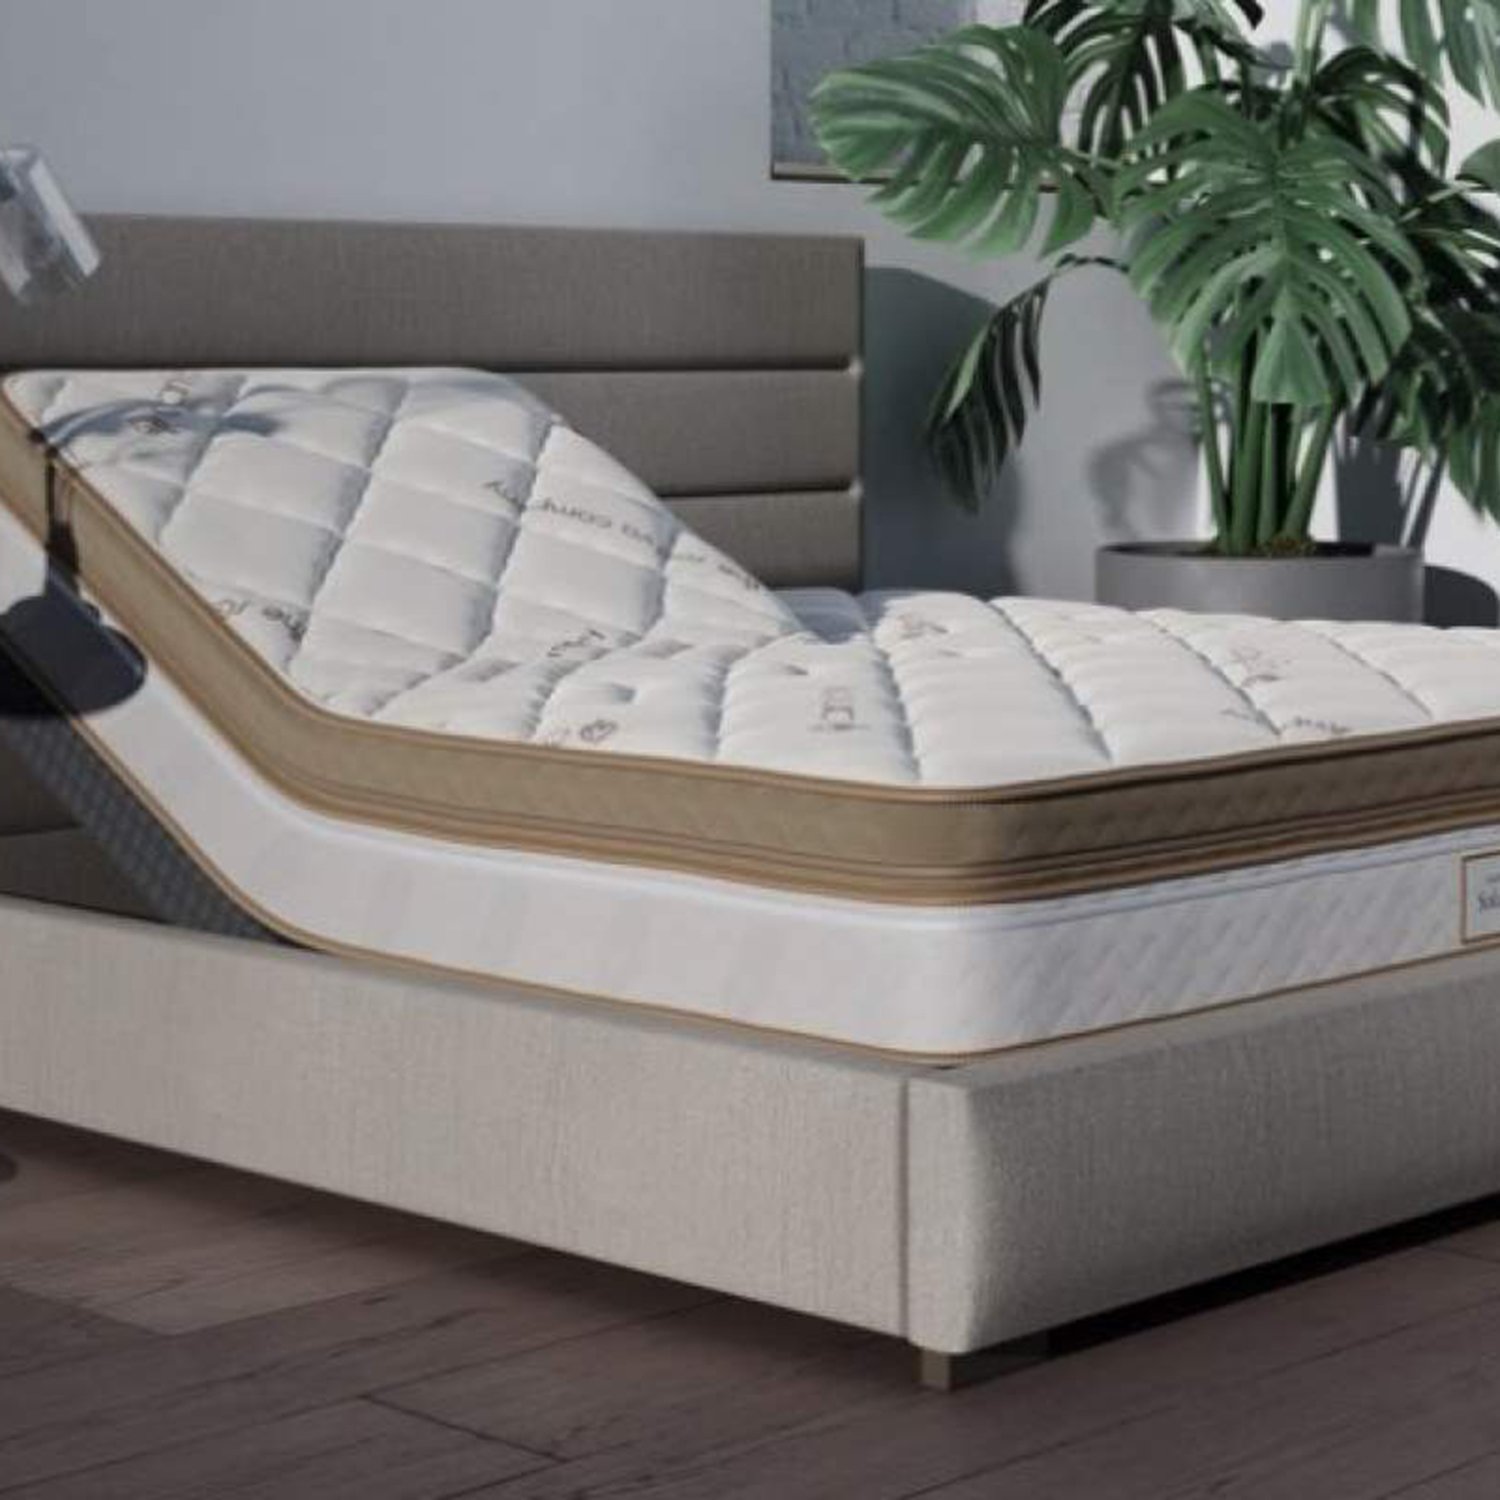 The 10 Best Mattresses for Back Pain 2021